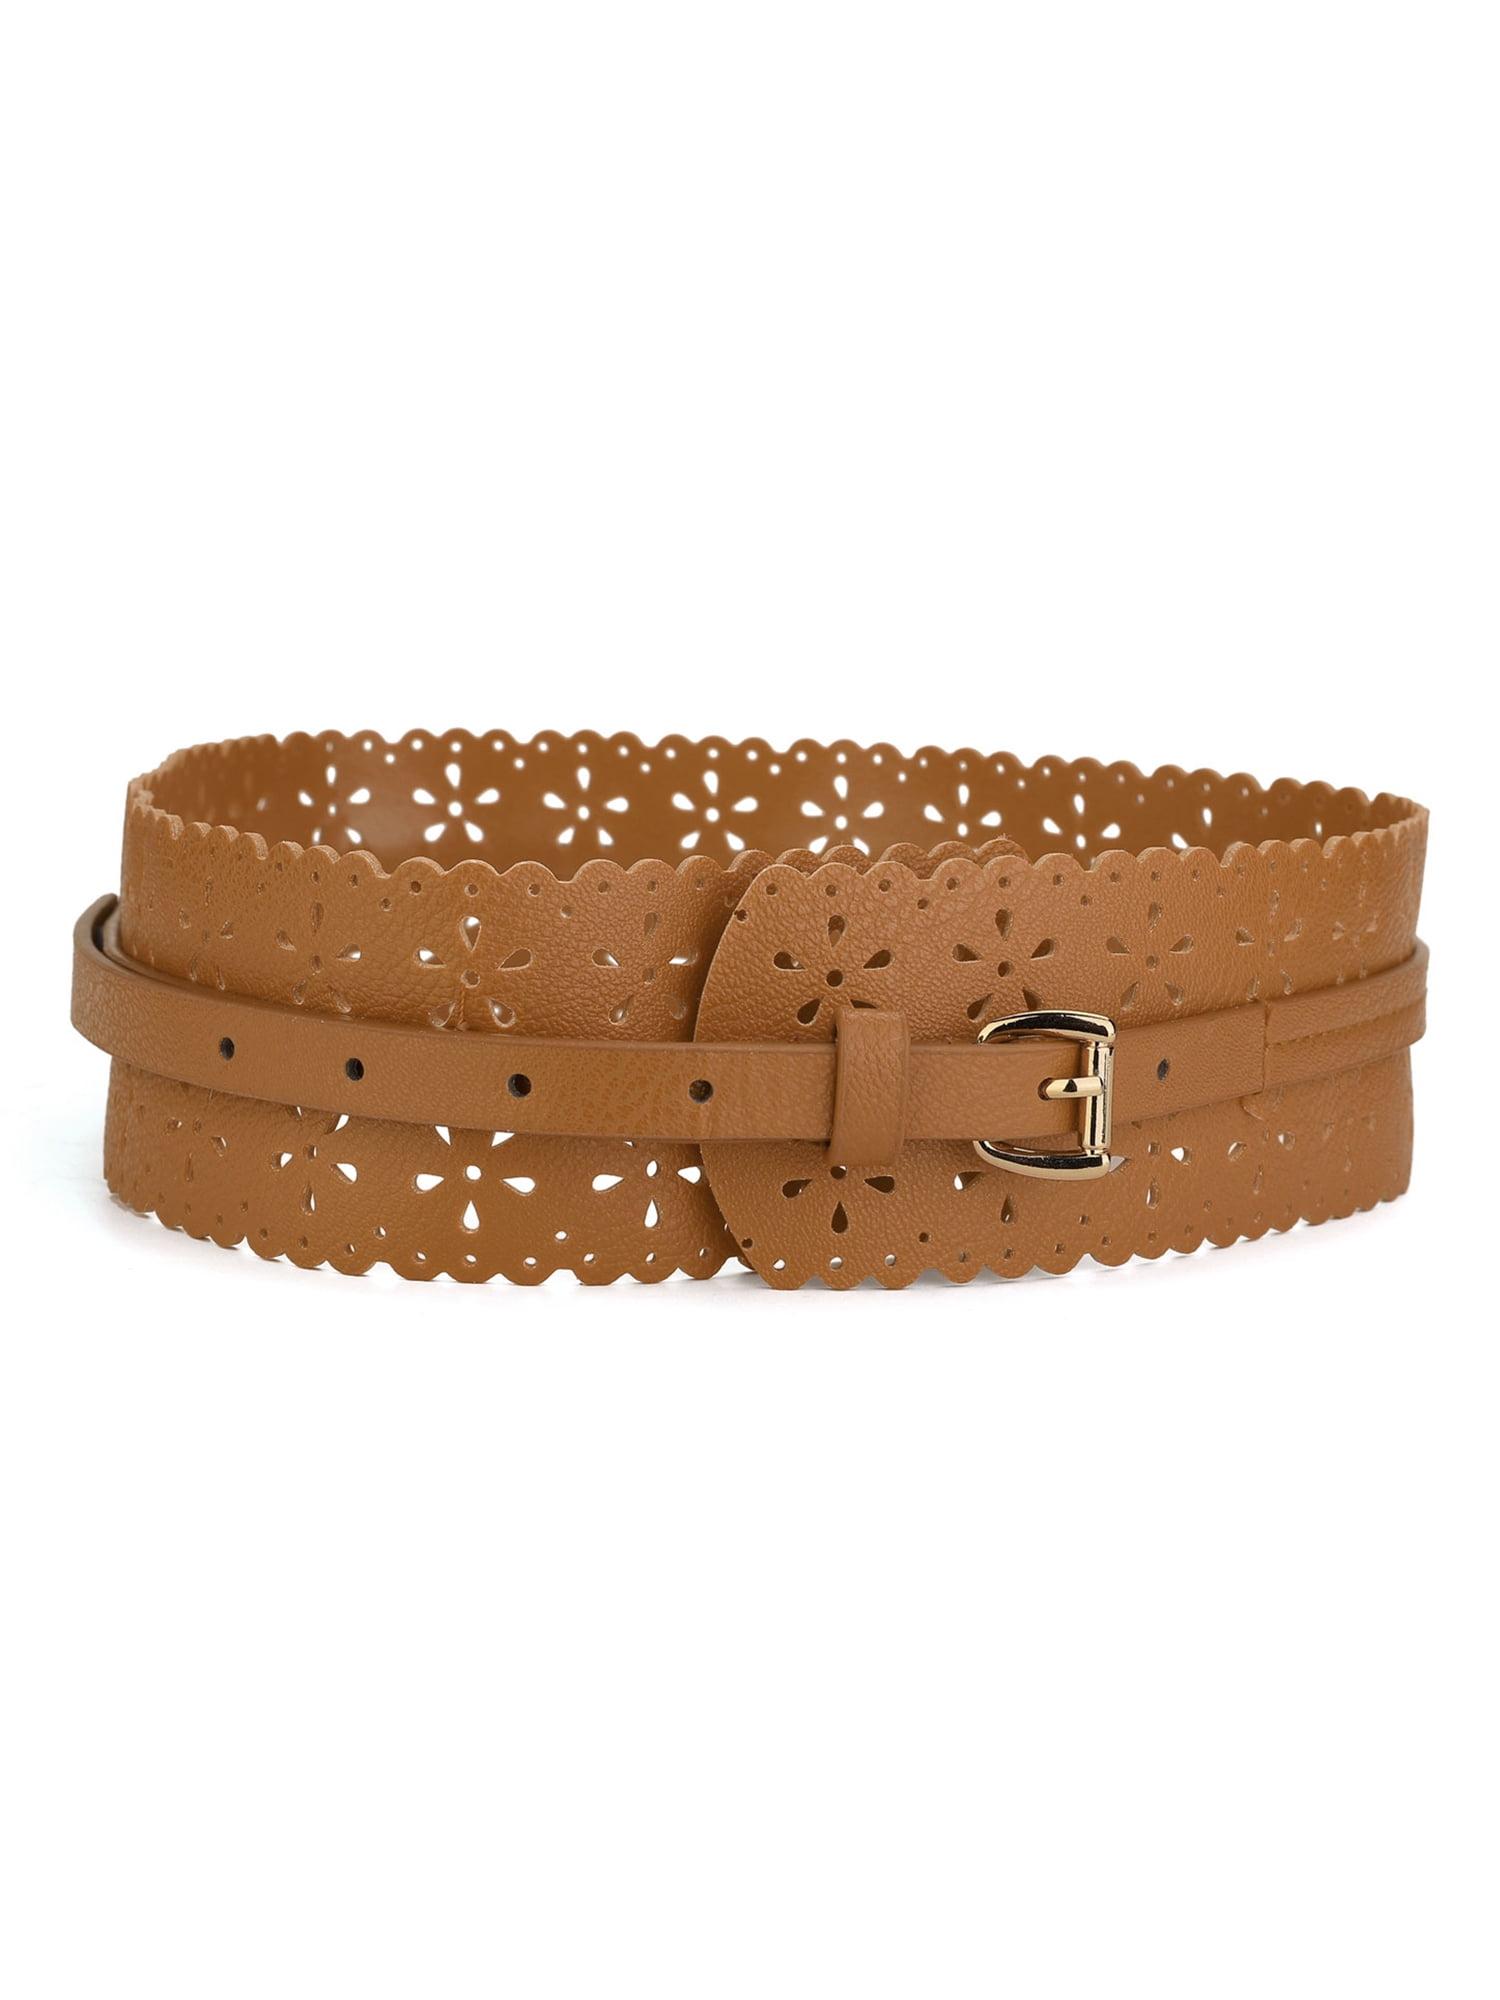 #120 A BROWN 2 HOLE STITCHED LEATHER BELT FOR WOMEN IN SIZES TO FIT MOST 